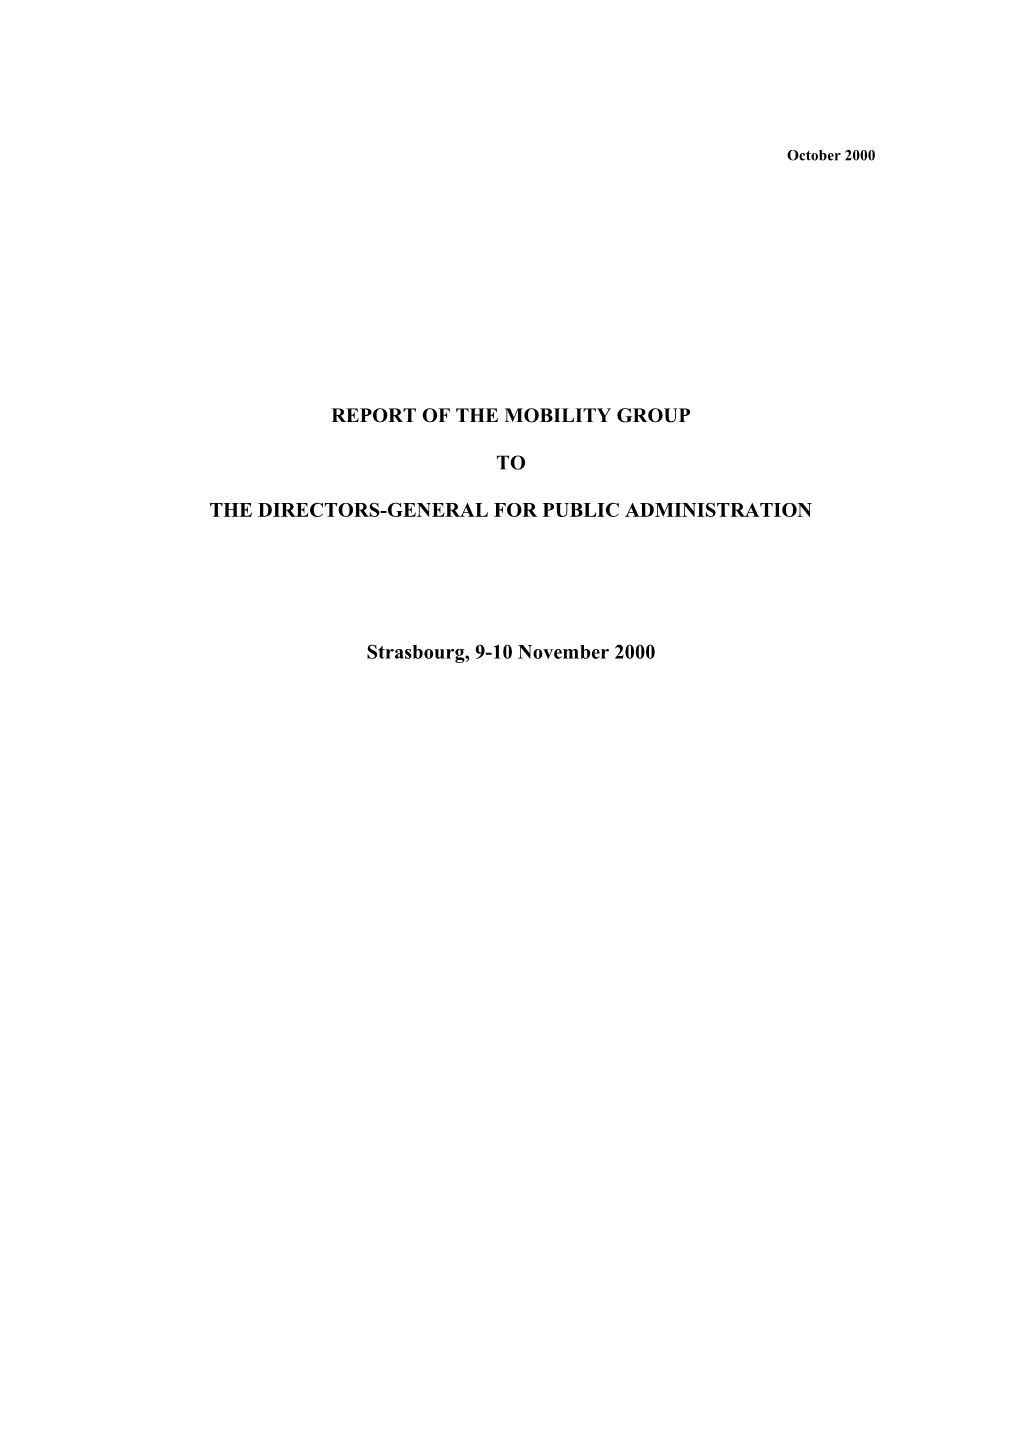 Report of the Mobility Group